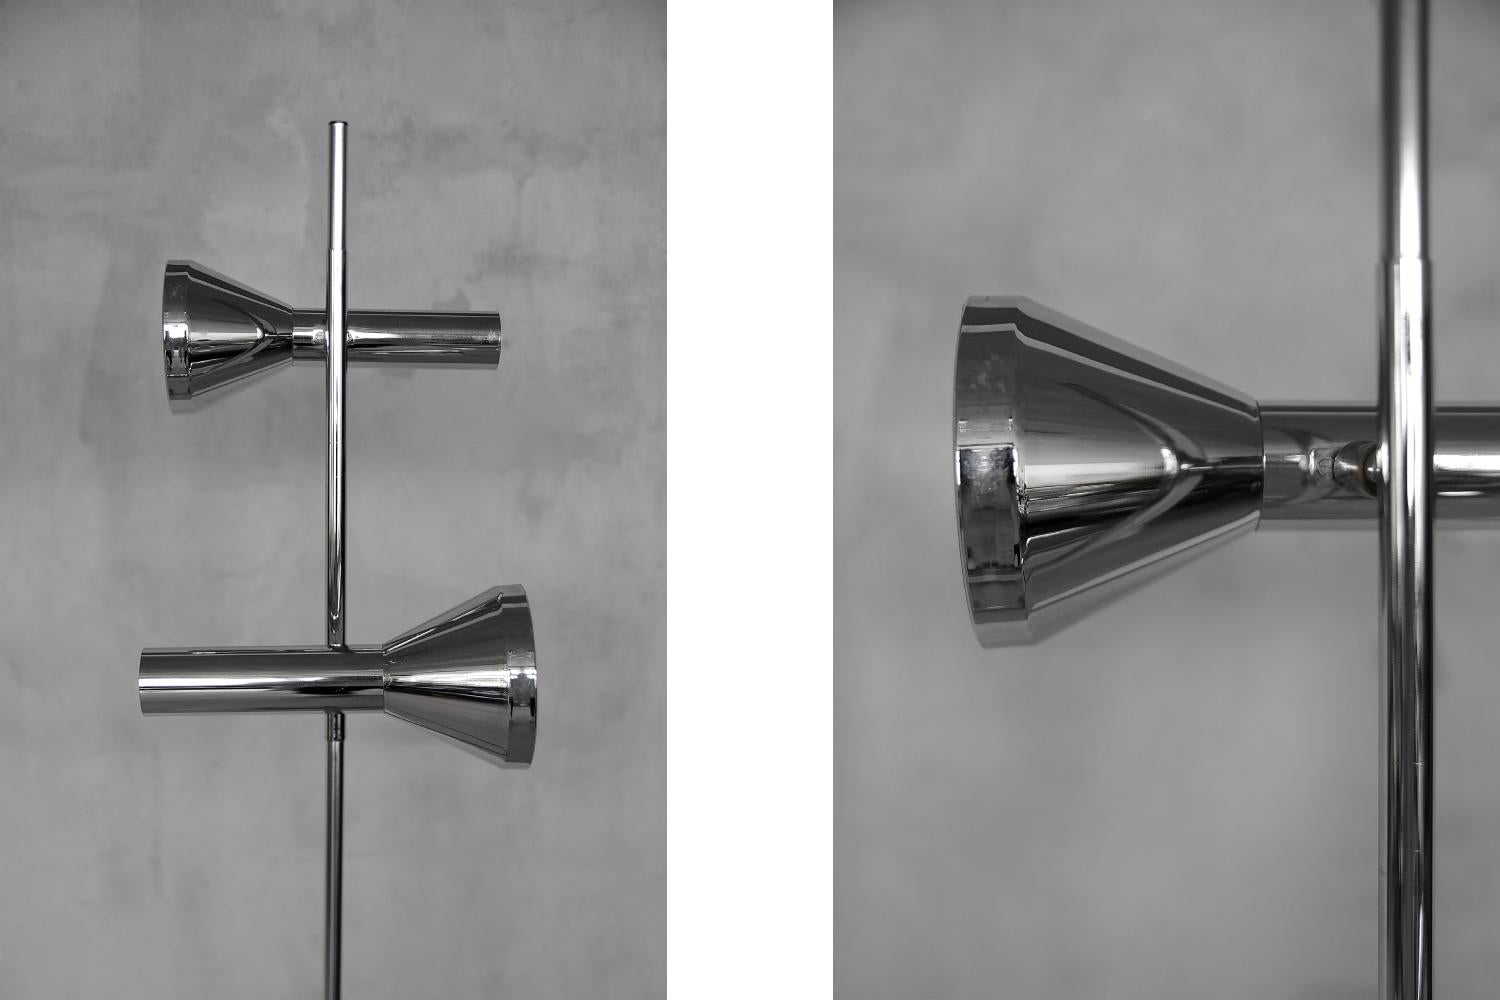 This chrome-plated floor lamp was produced by the German Hustadt Leuchten factory in Neheim during the 1960s. It has two movable reflectors that can be turned on and off separately, and the angle of light can be directed anywhere. This piece has